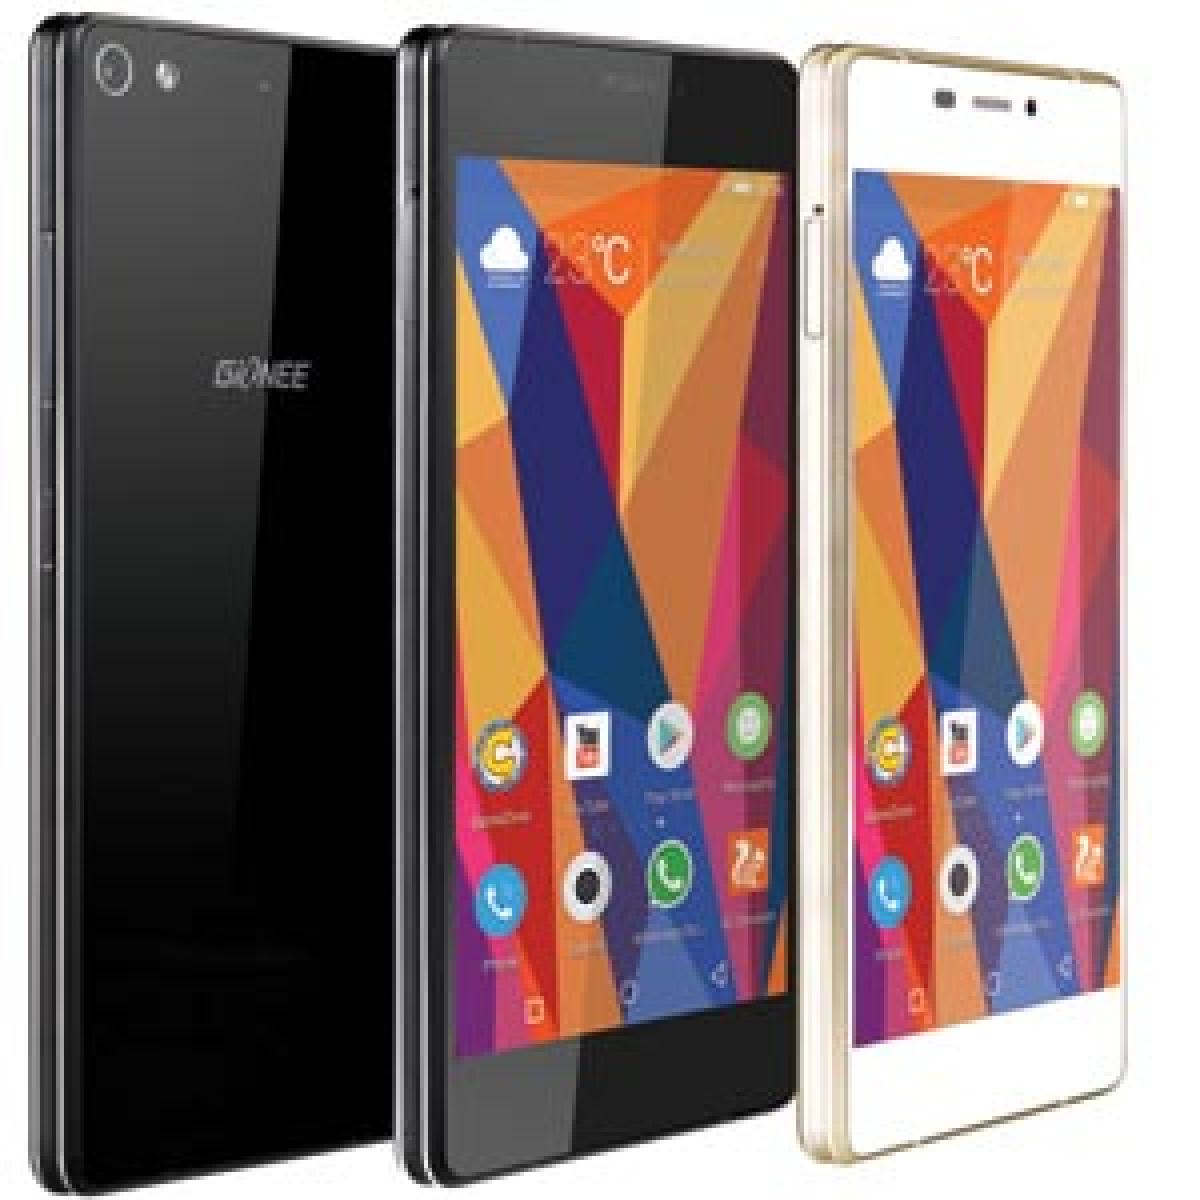 Buy Gionee Mobiles at 0% Interest